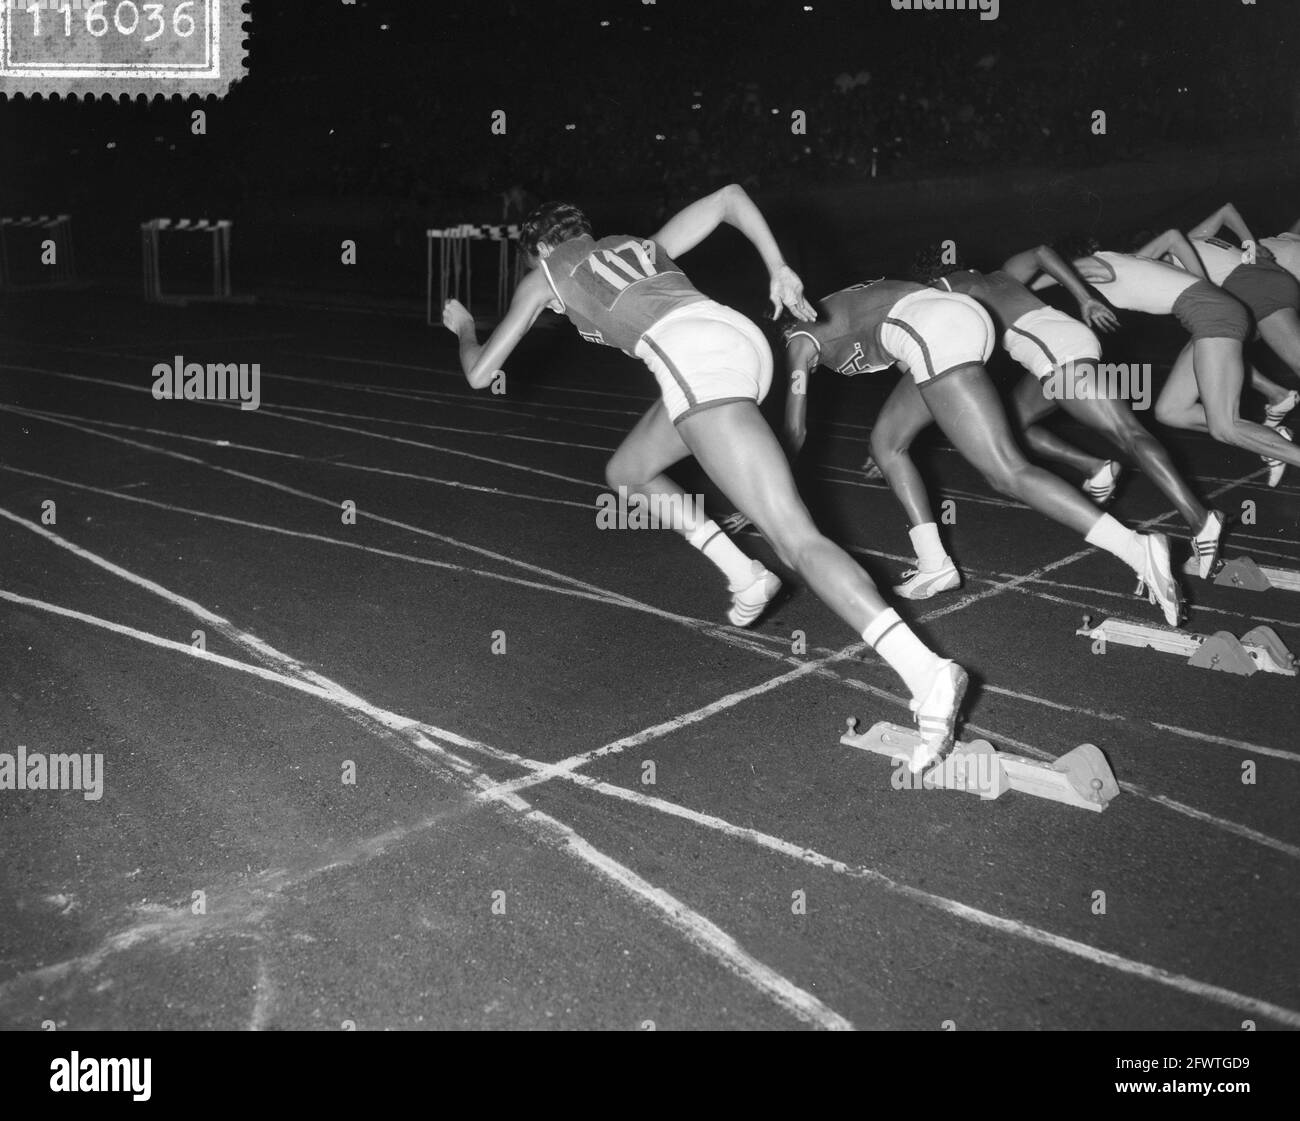 Olympic revivals in stadium Amsterdam, Wilma Rudolph, September 15, 1960, athletics, The Netherlands, 20th century press agency photo, news to remember, documentary, historic photography 1945-1990, visual stories, human history of the Twentieth Century, capturing moments in time Stock Photo